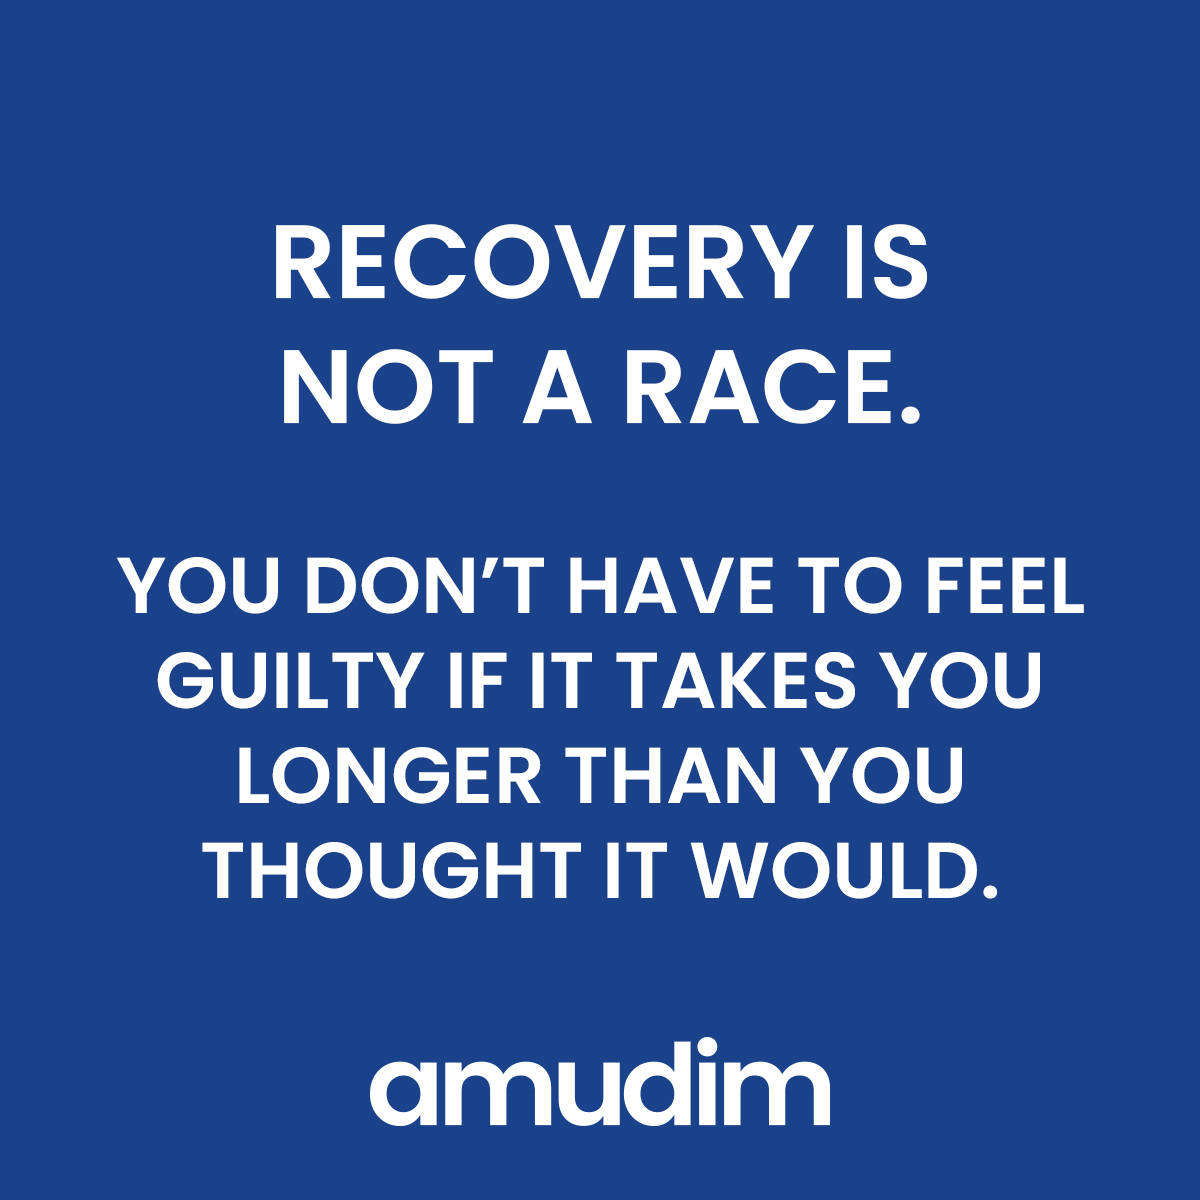 recovery-is-not-a-race